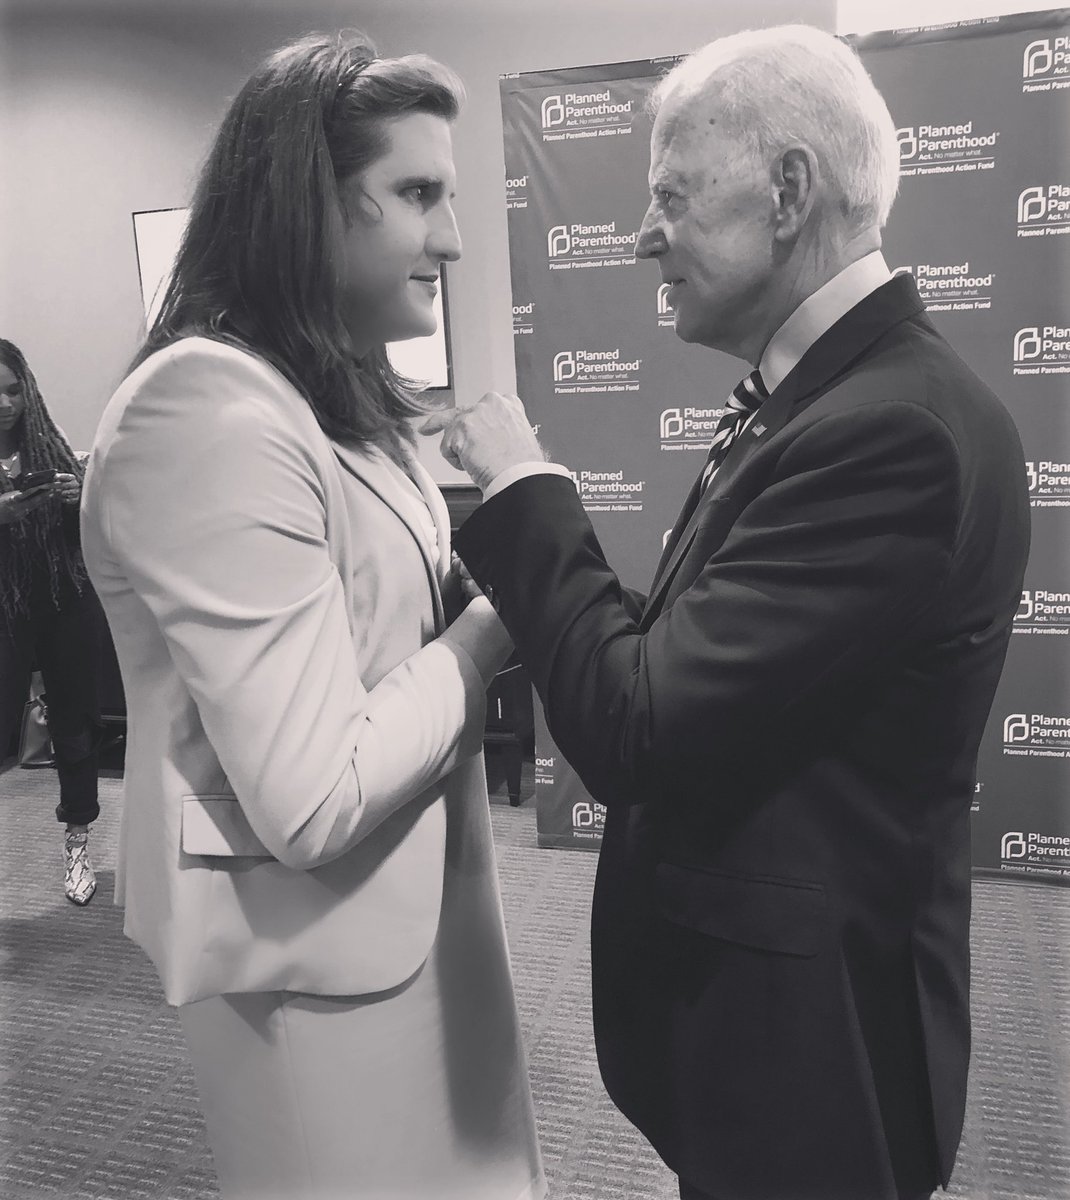 I met Joe Biden last year. He was kind, thoughtful, and completely engaged. When I brought up trans rights, he got very serious. He leaned in and with a finger pointed my way, said: “I am in this fight with you. Trans rights are human rights.”I believe him.  #Biden2020